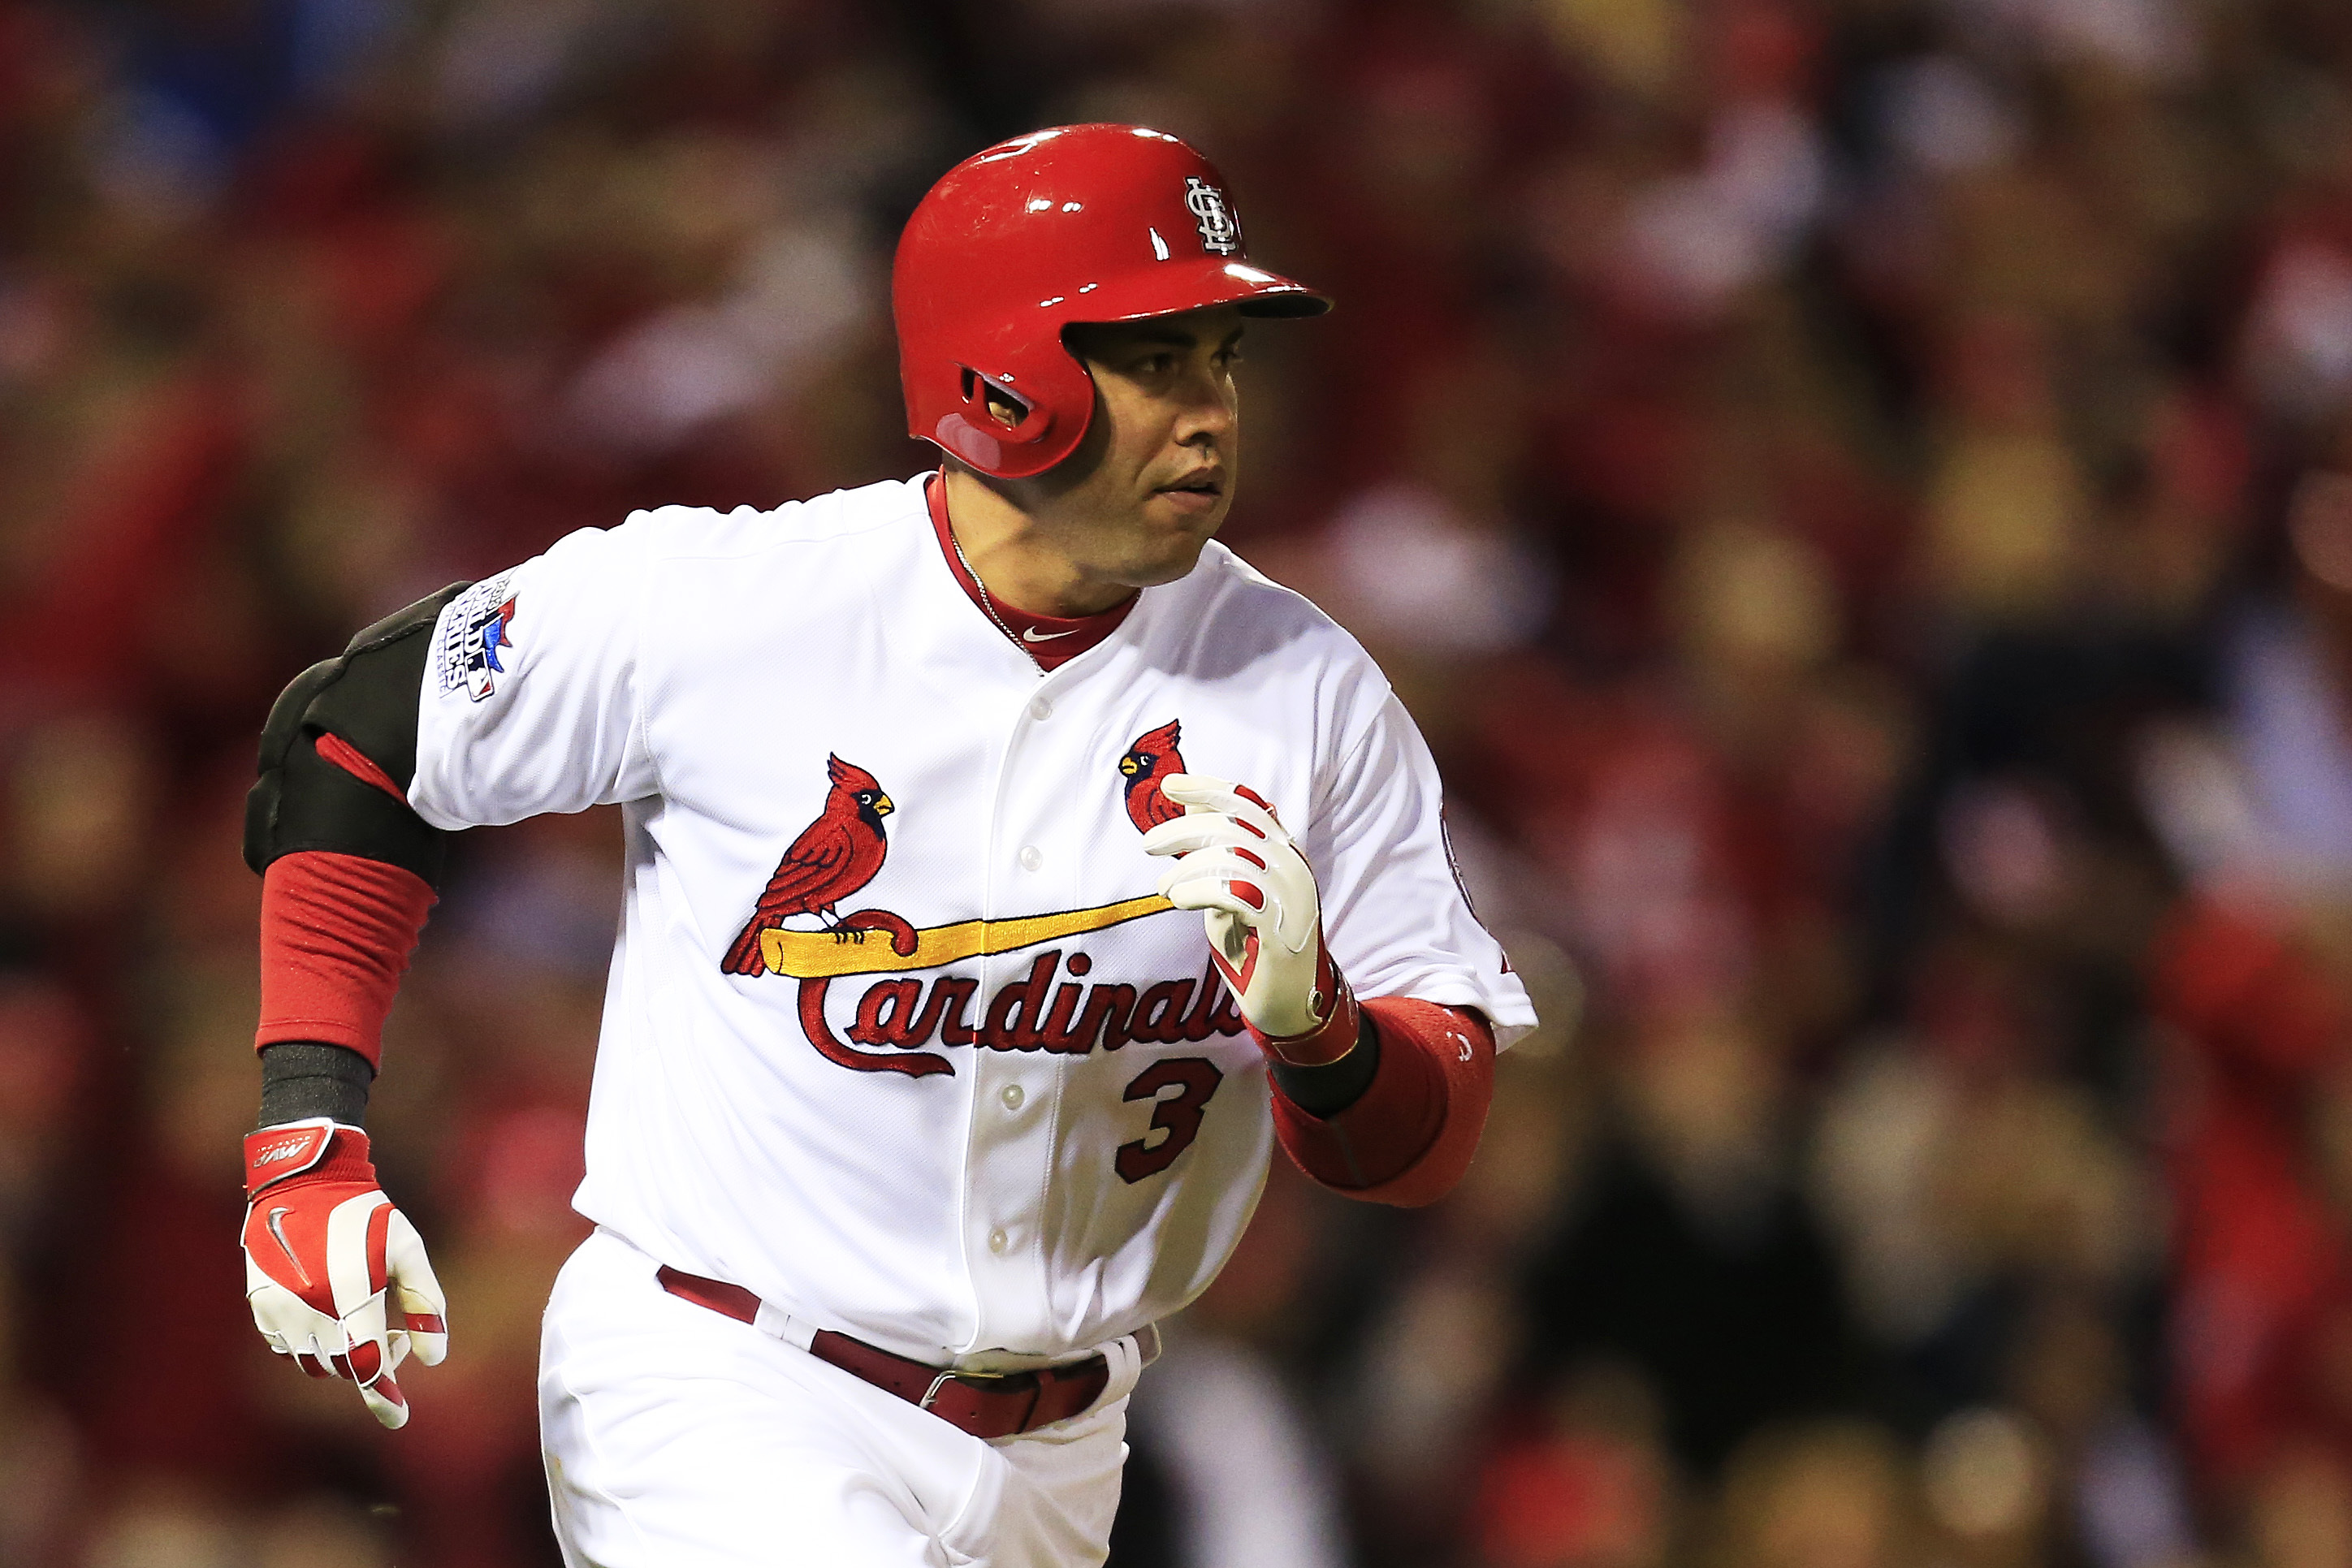 Carlos Beltran, the St. Louis Cardinals, and the perfect contract